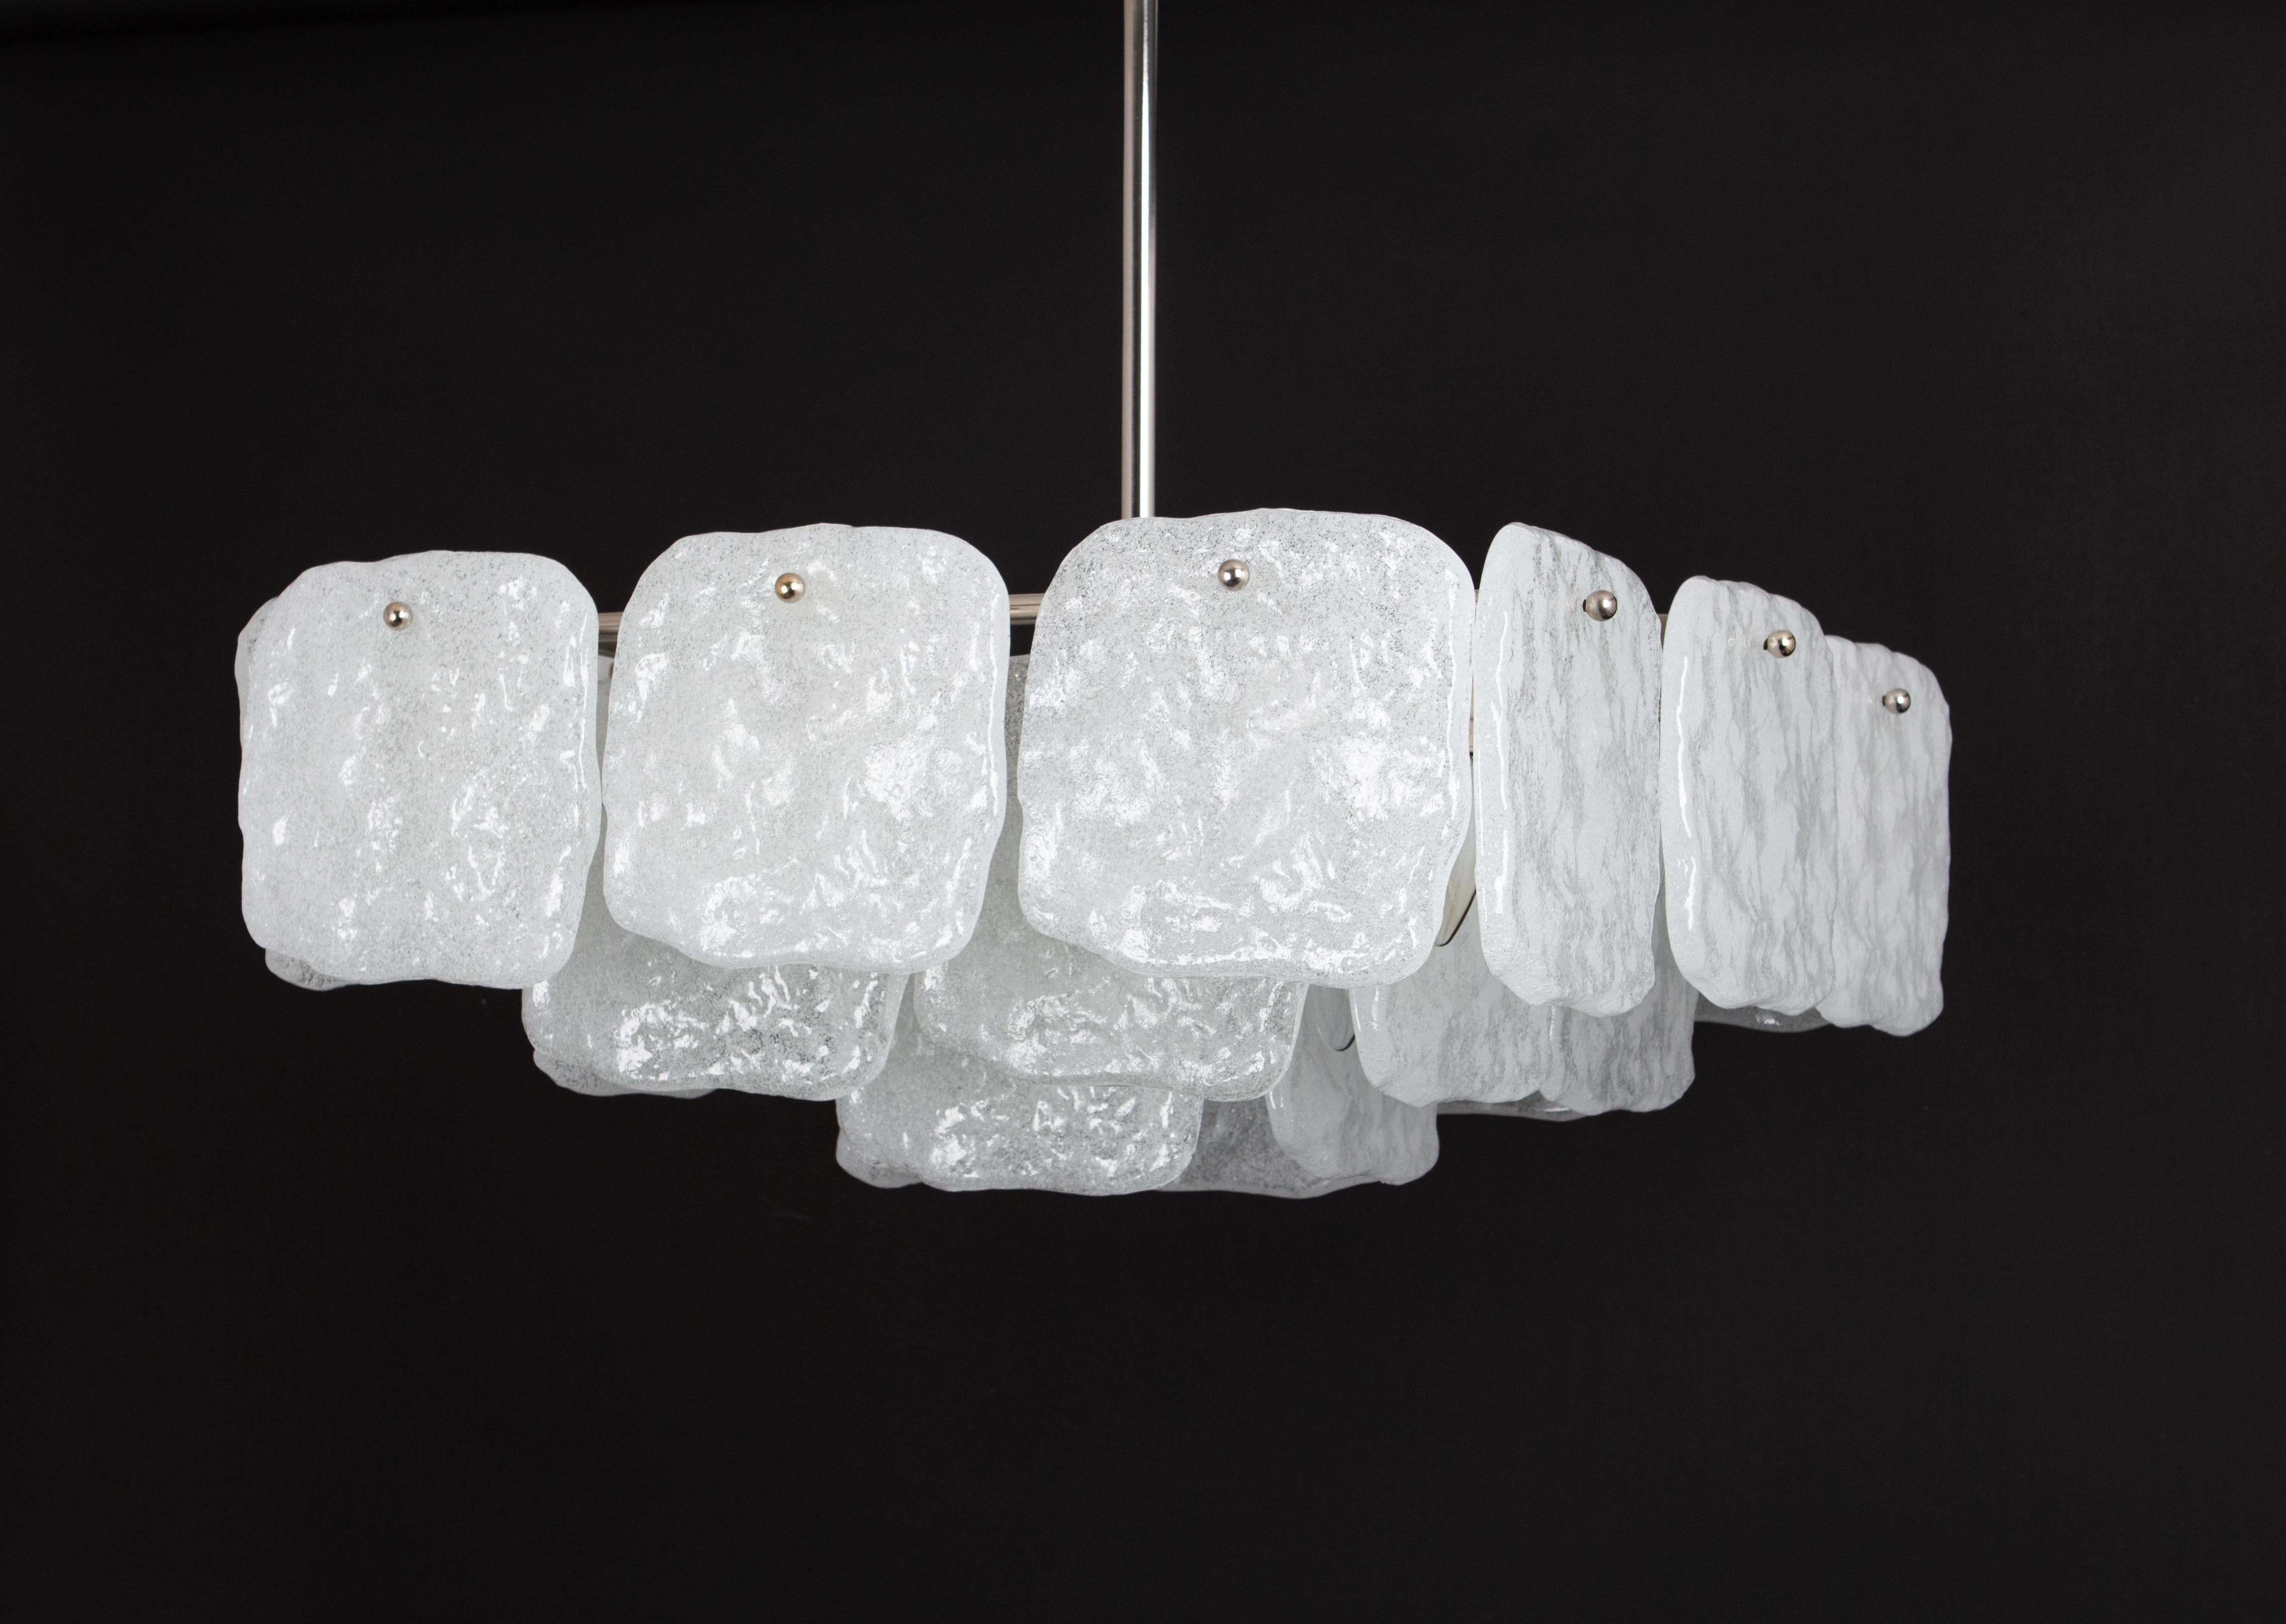 1 of 2 Large Murano Ice Glass Chandelier by Kalmar, Austria, 1960s For Sale 4